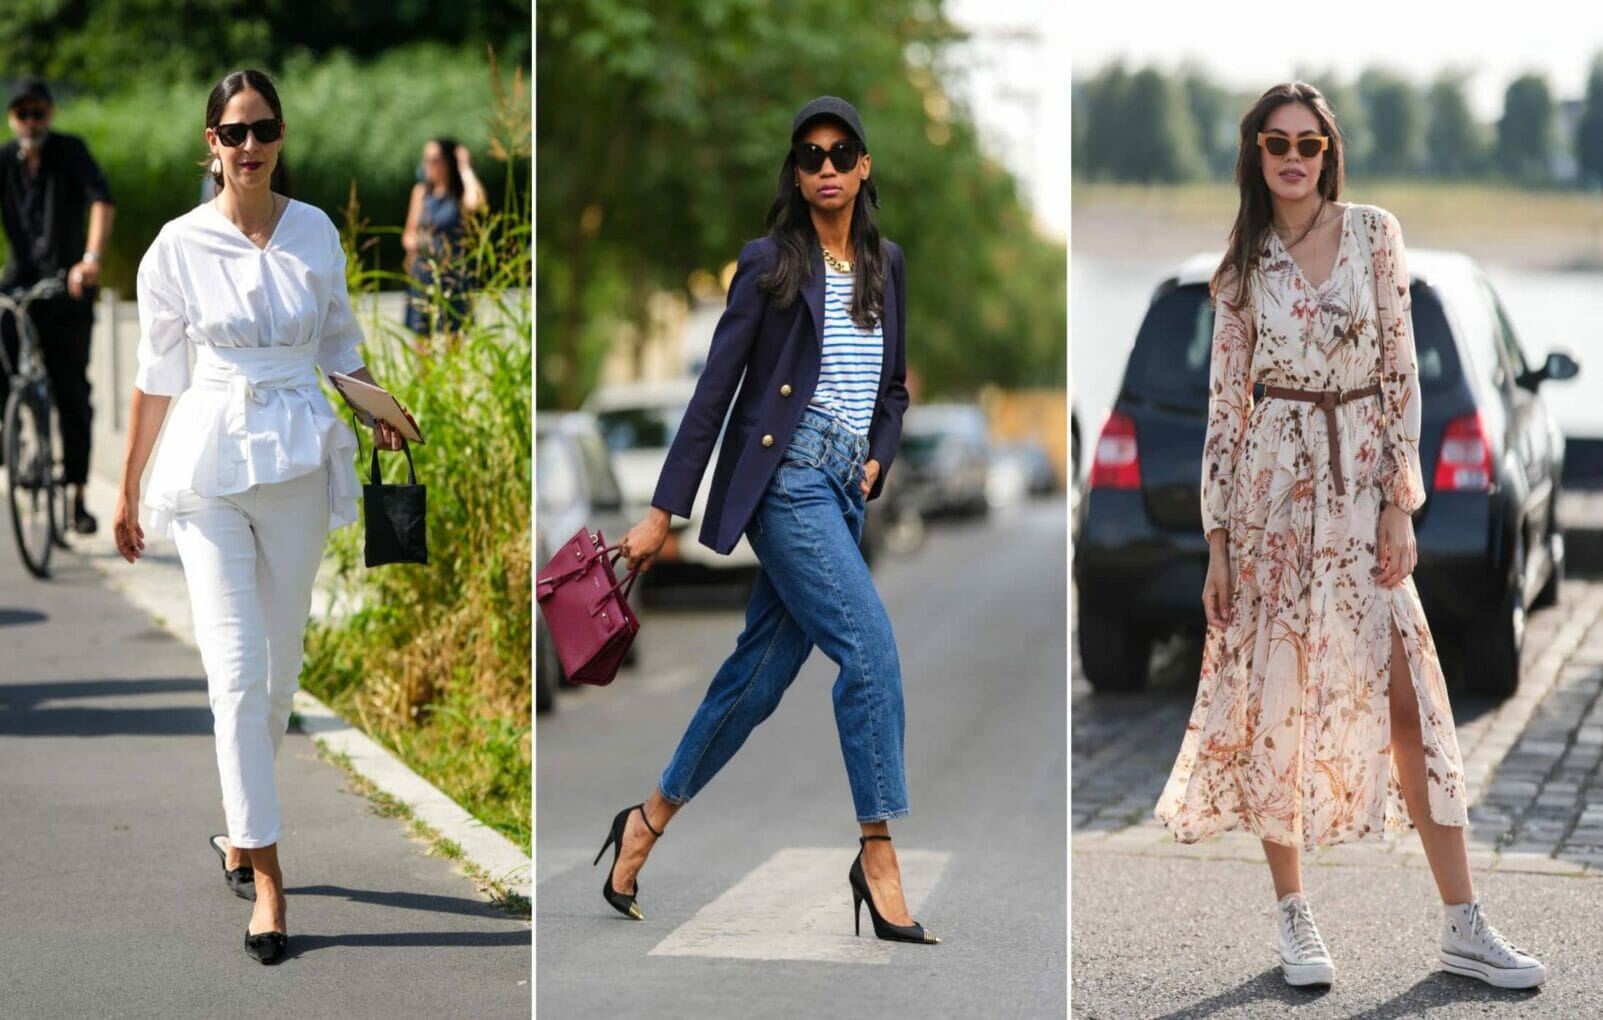 Casual outfit: 4 simple ways to stand out and look smart - Kemi Filani News